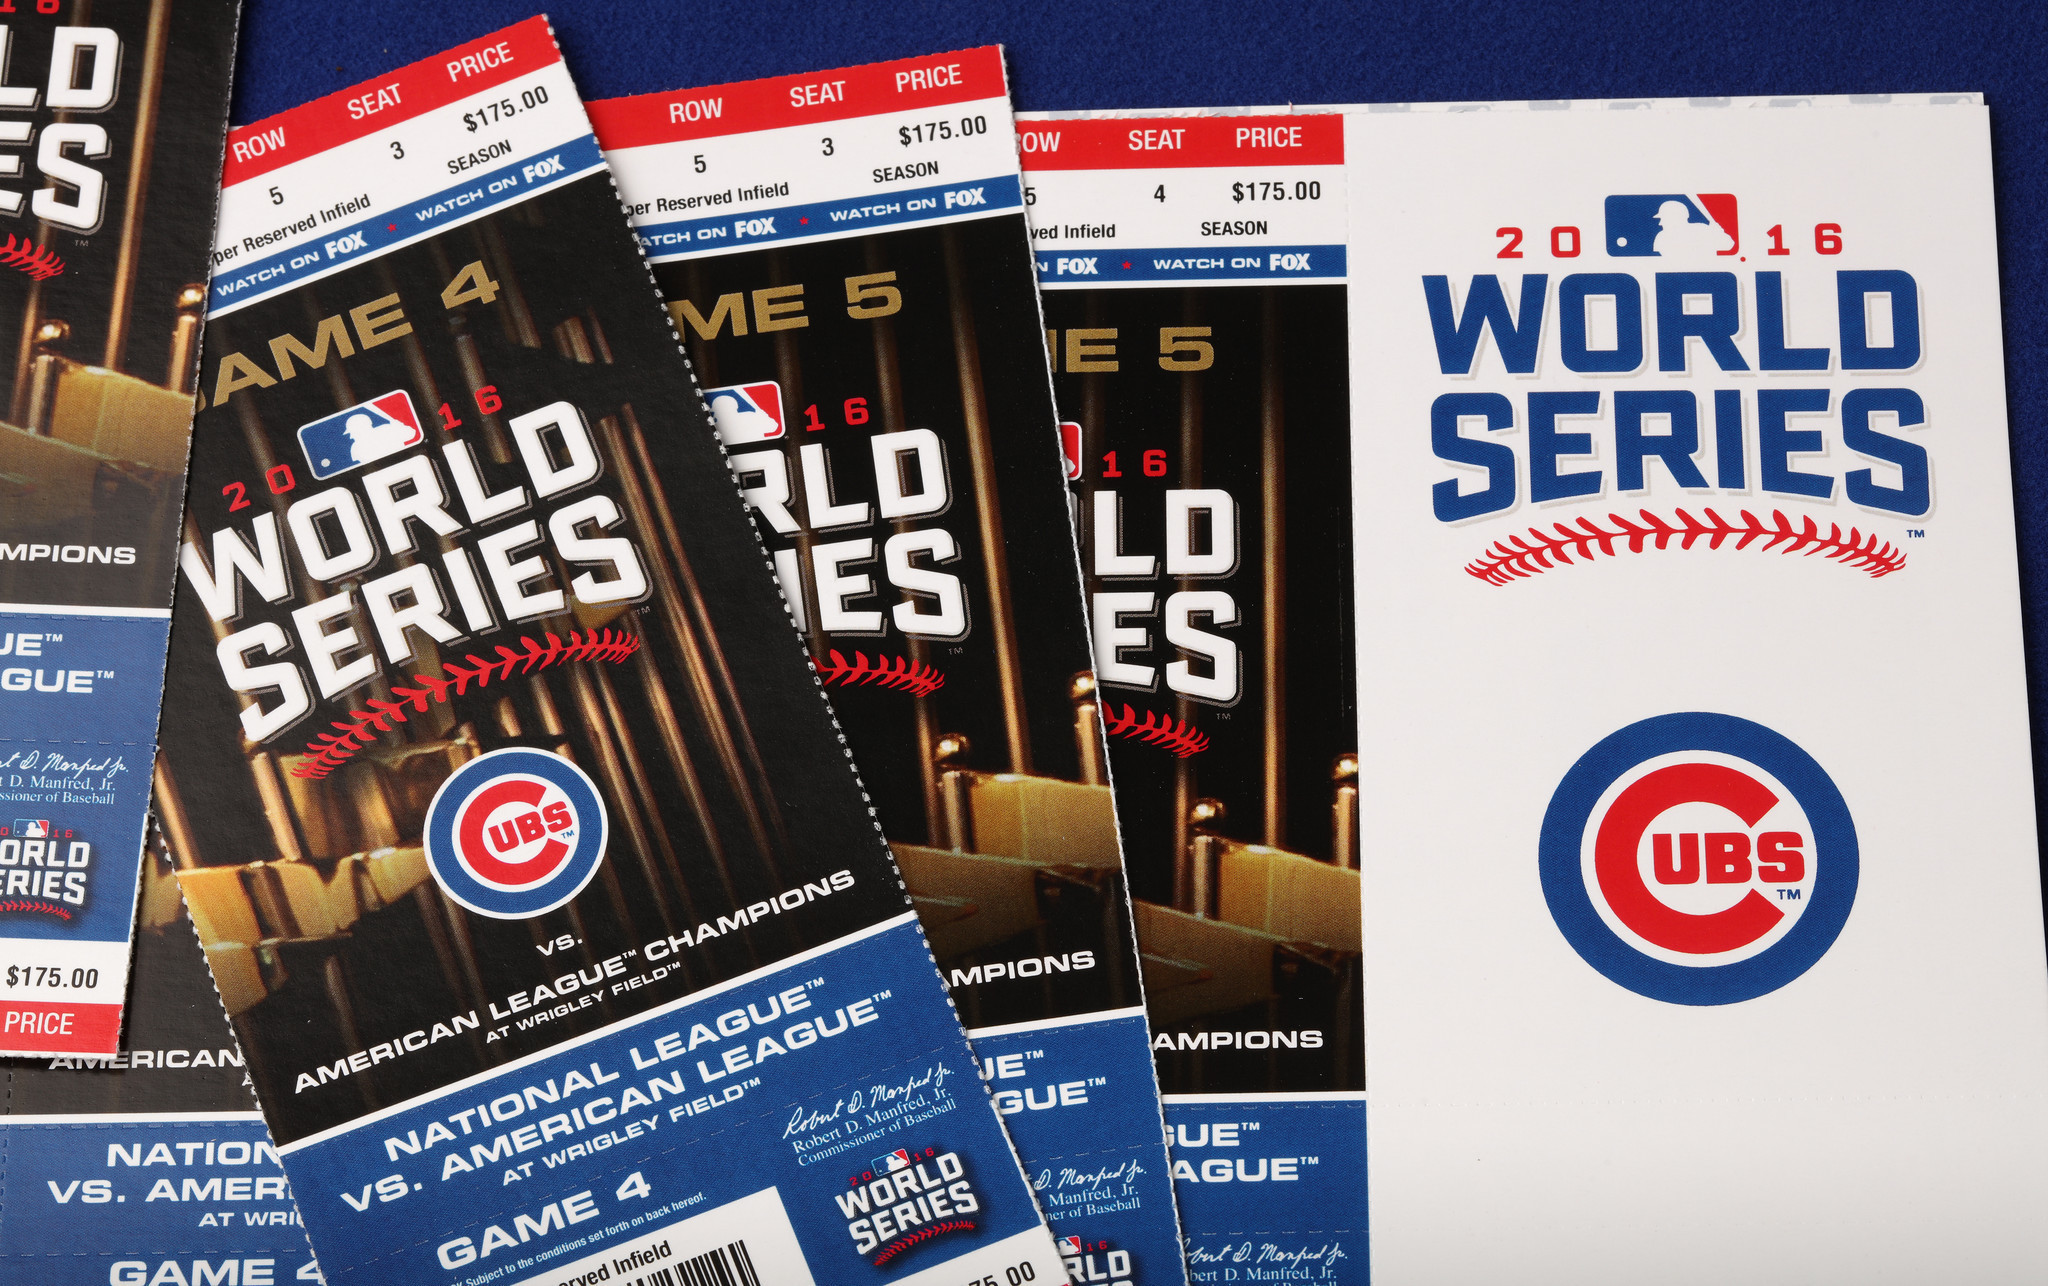 New Cubs ticket rules for mayor, aldermen will apply to World Series